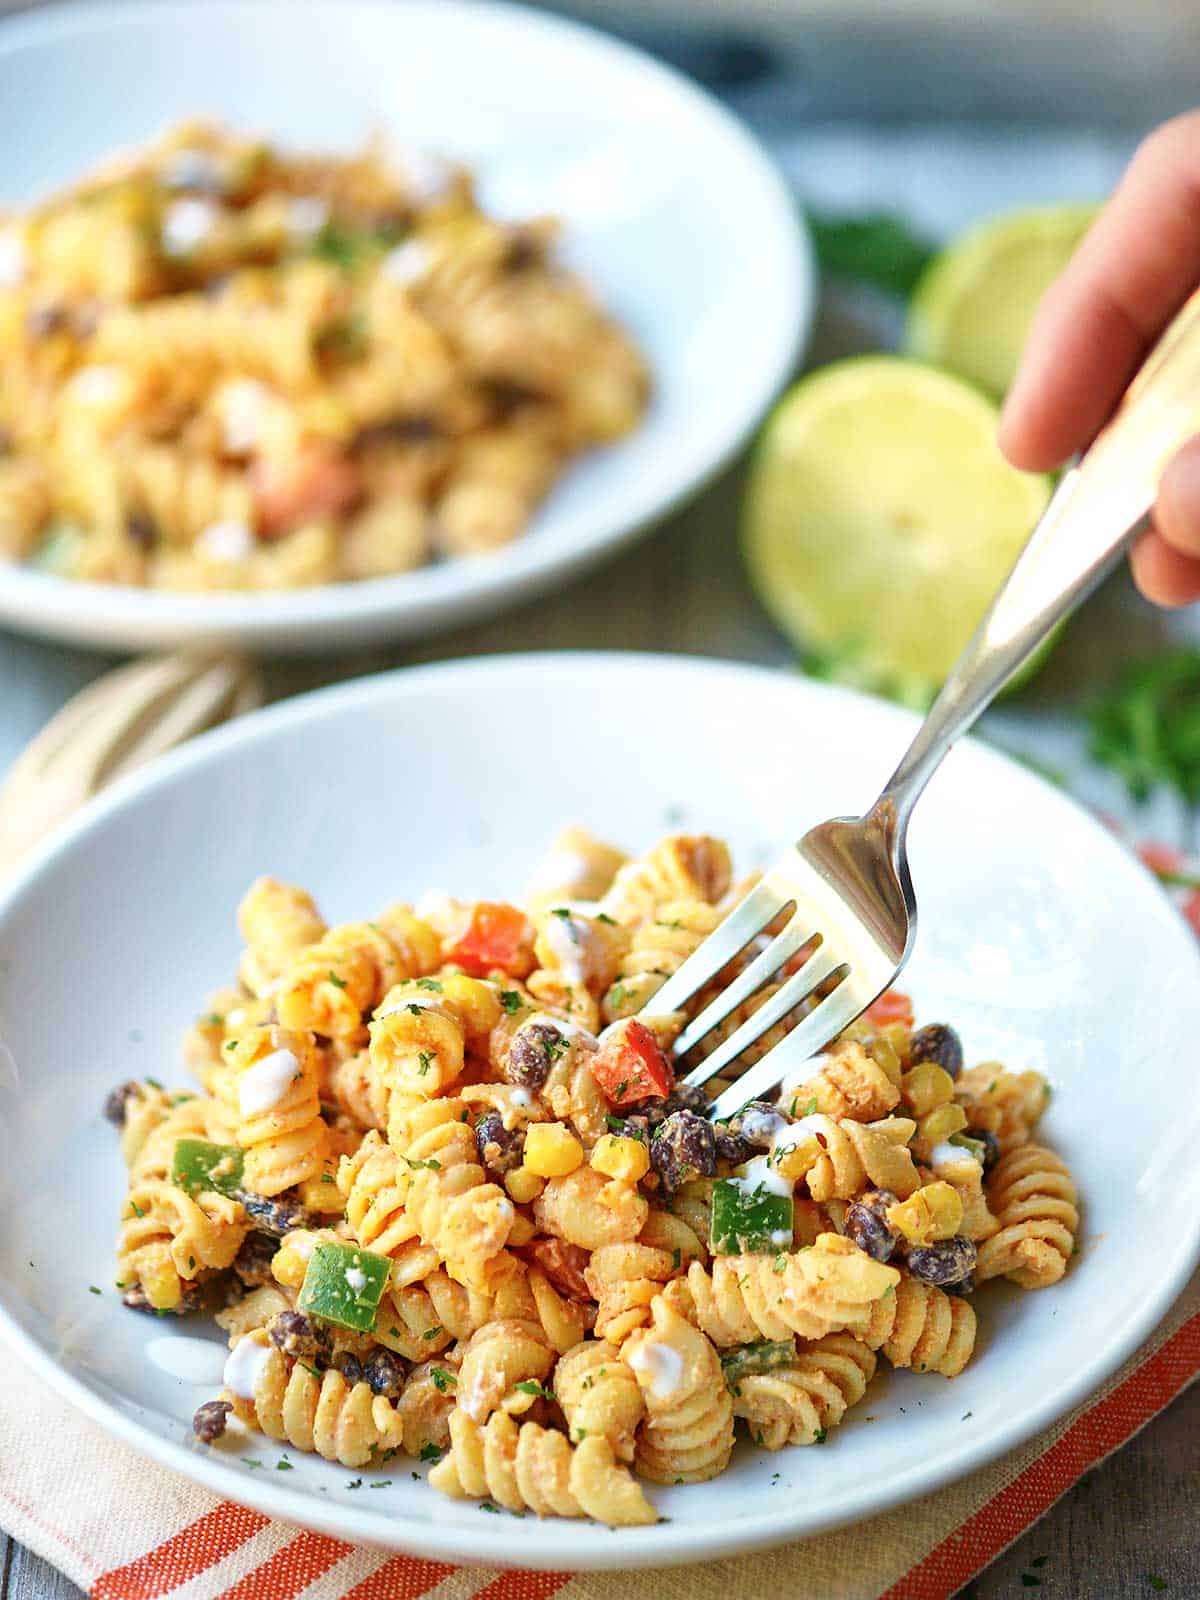 Plate of Mexican pasta salad with fork